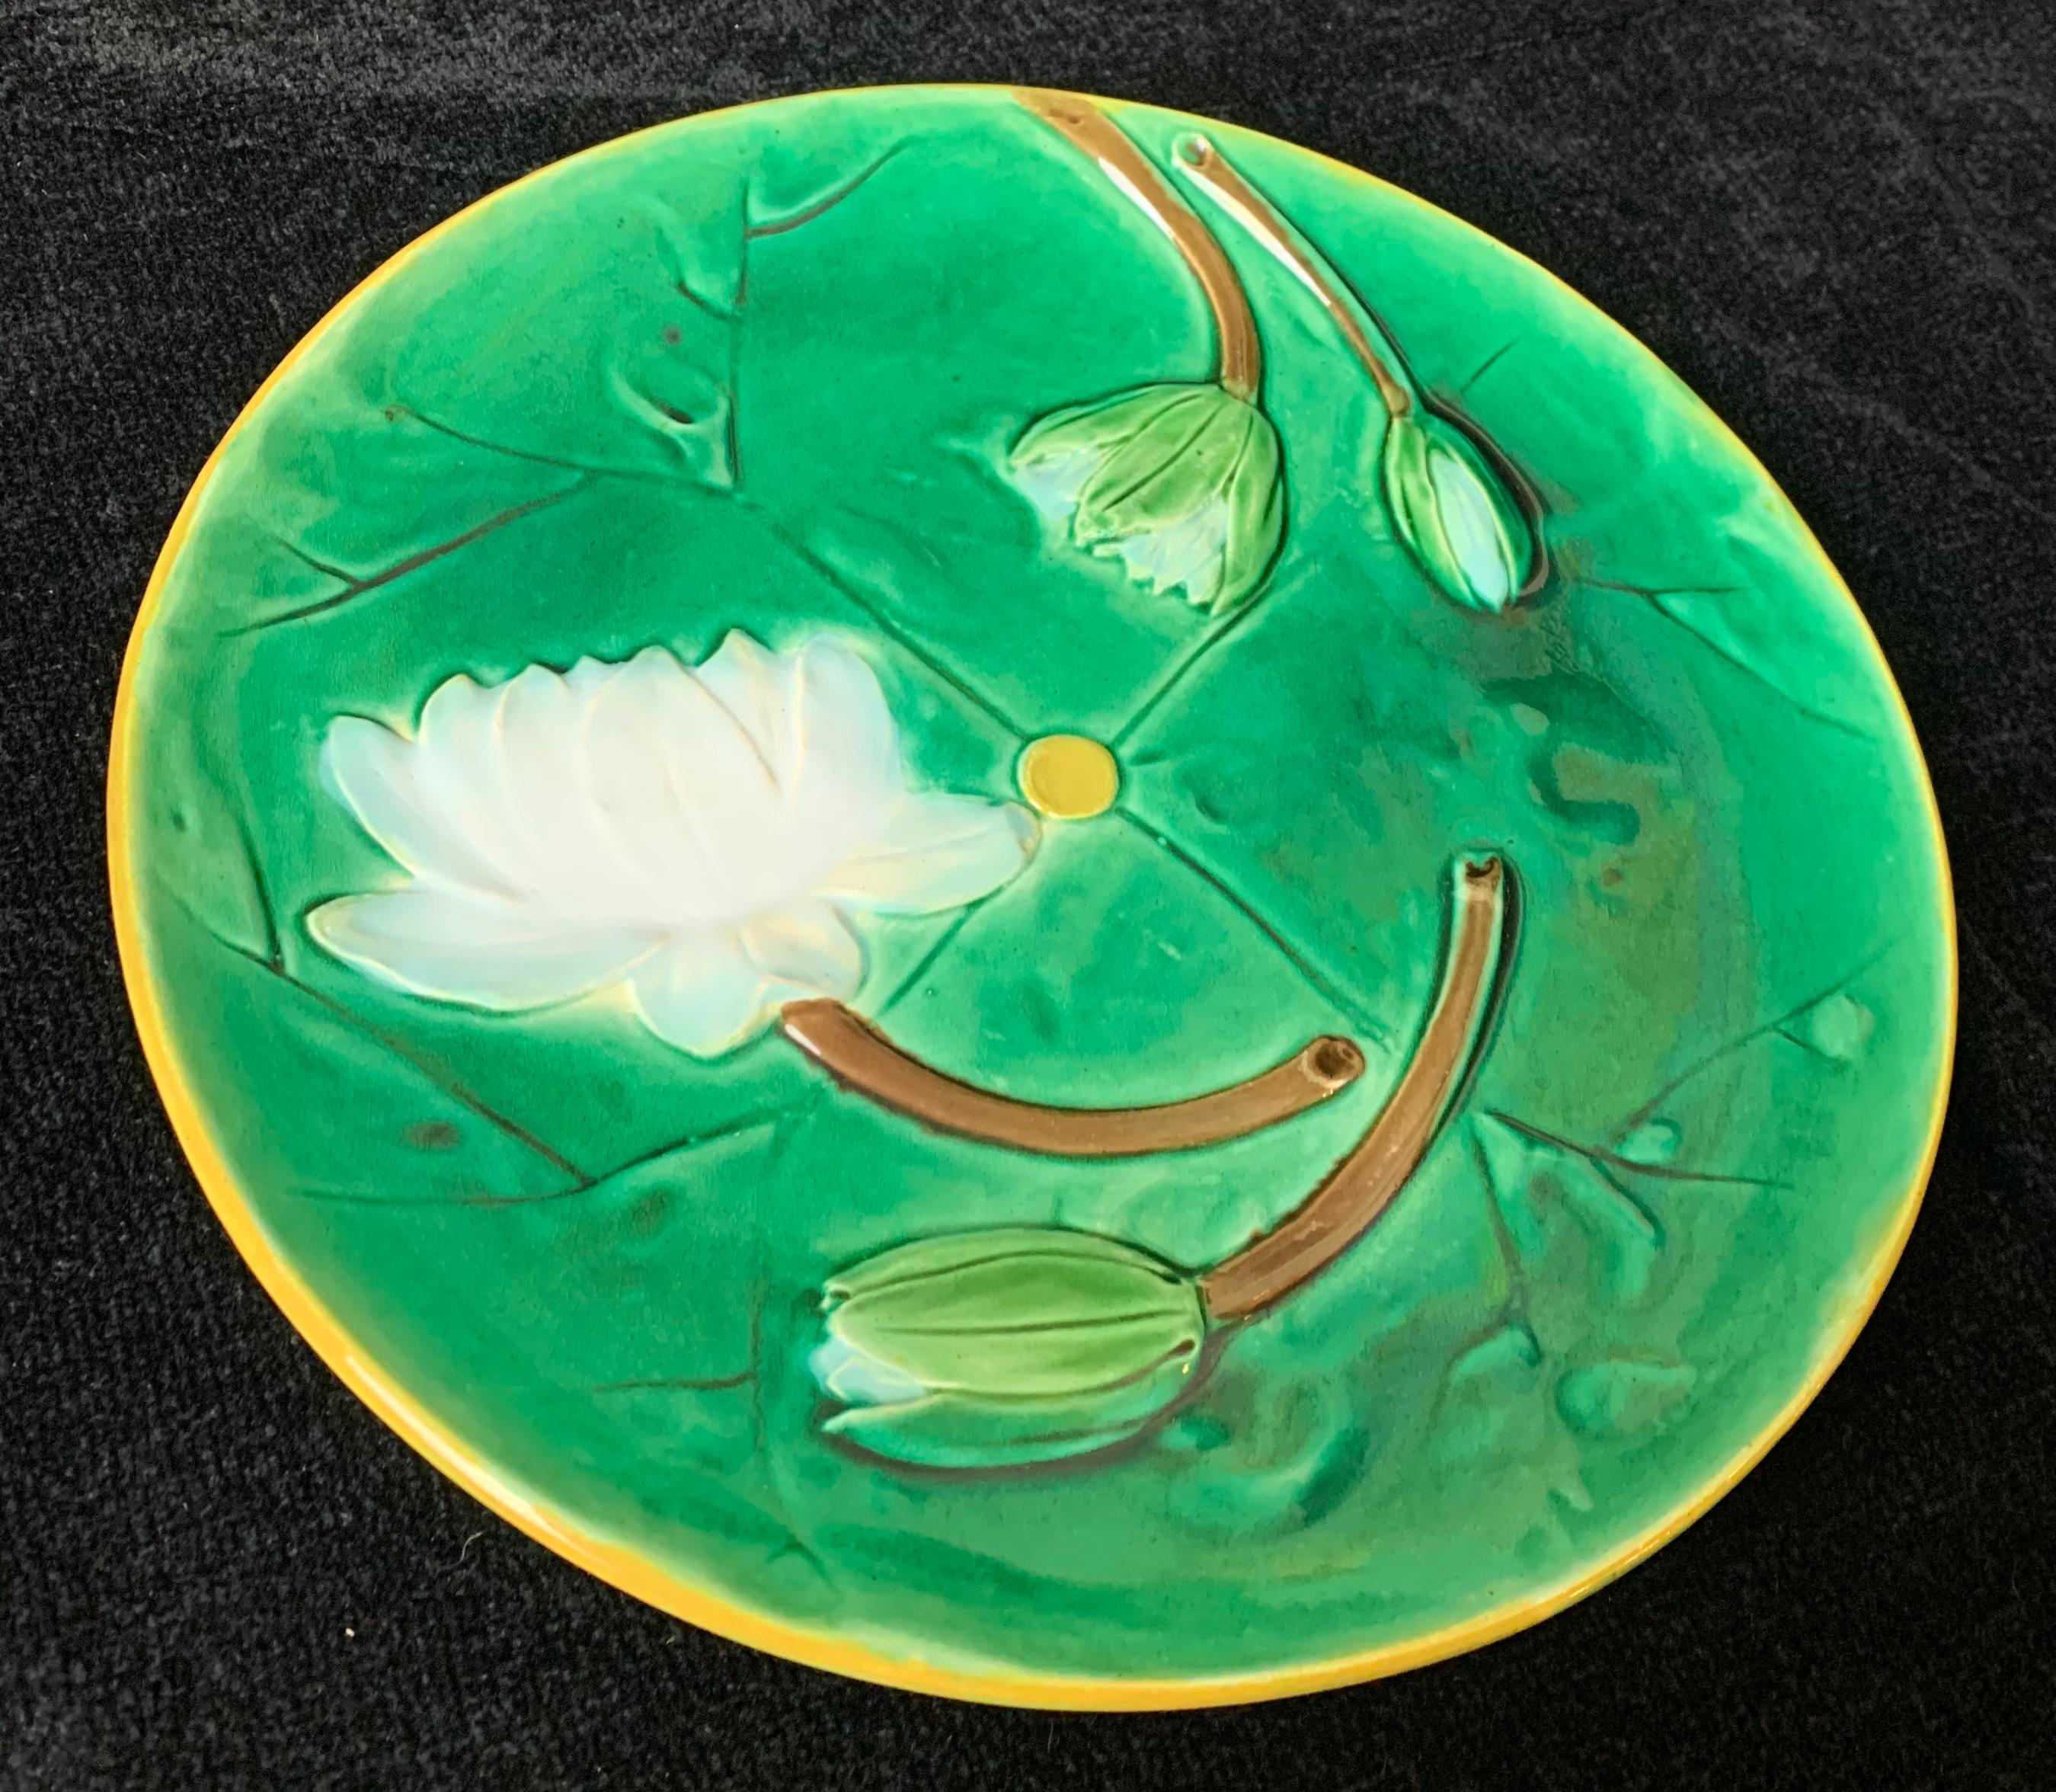 Joseph Holdcroft Majolica Pond Lily plate, English, circa 1875, Signed 'J HOLDCROFT'. Glazed in deep emarald green molded with flowering white lotuses, impressed to reverse: 'J HOLDCROFT' for Joseph Holdcroft. A signed example of this pattern is